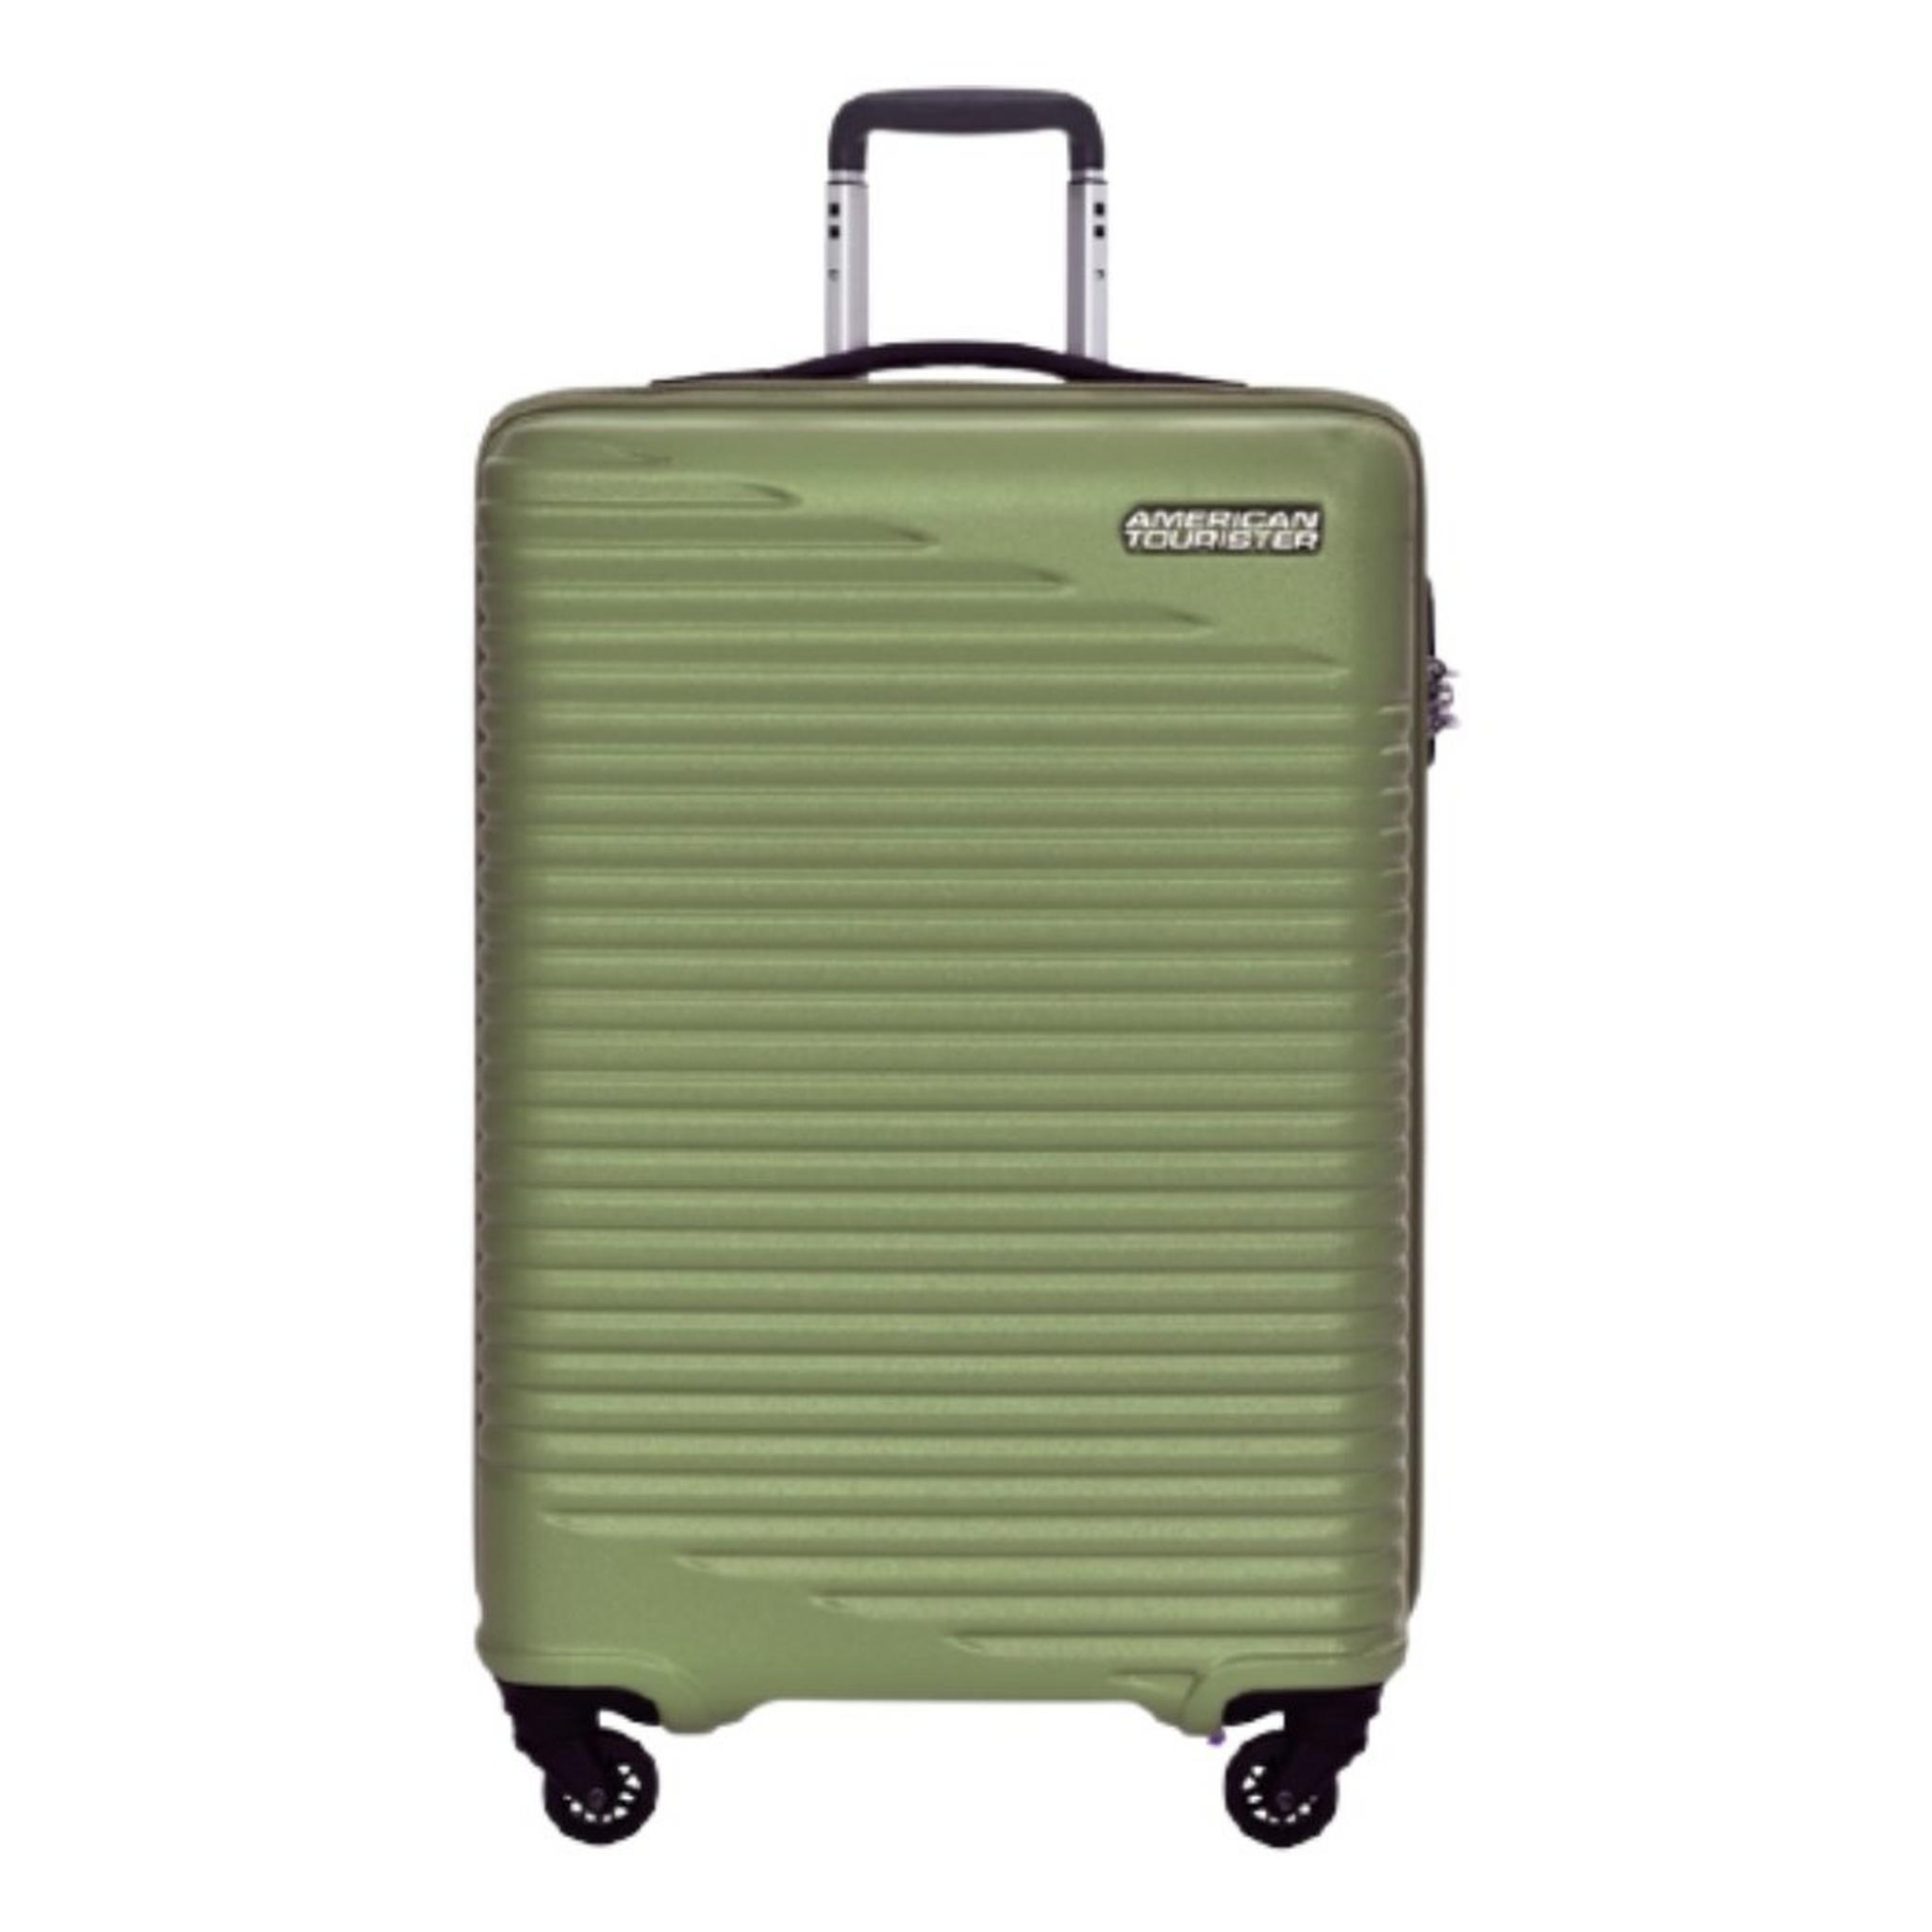 American Tourister 68cm Spinner Sky Park Hard Luggage - Green